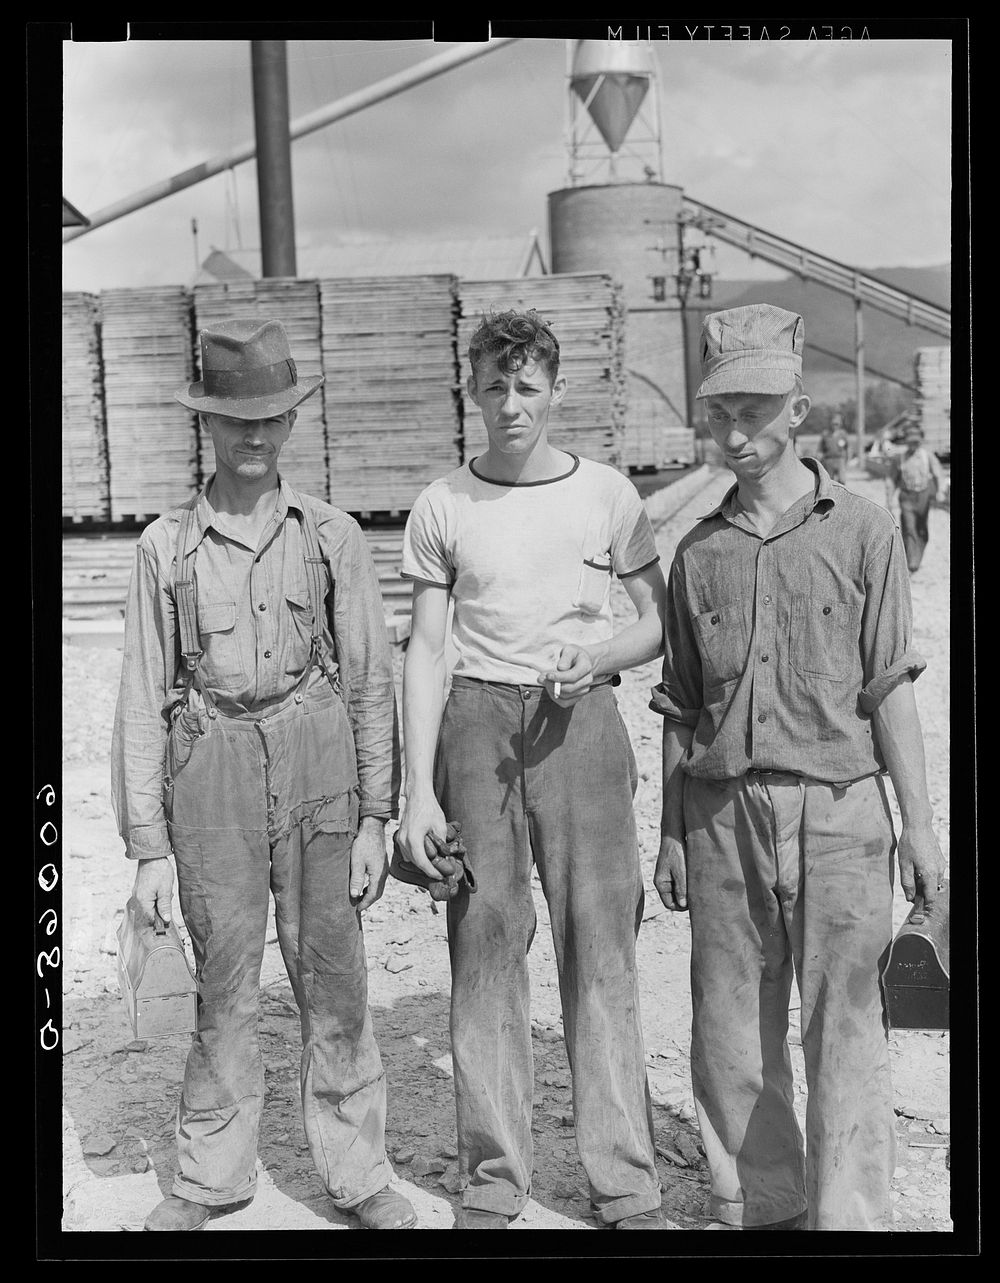 Workers in the dimension wood plant at Tygart Valley Homesteads, West Virginia. Sourced from the Library of Congress.